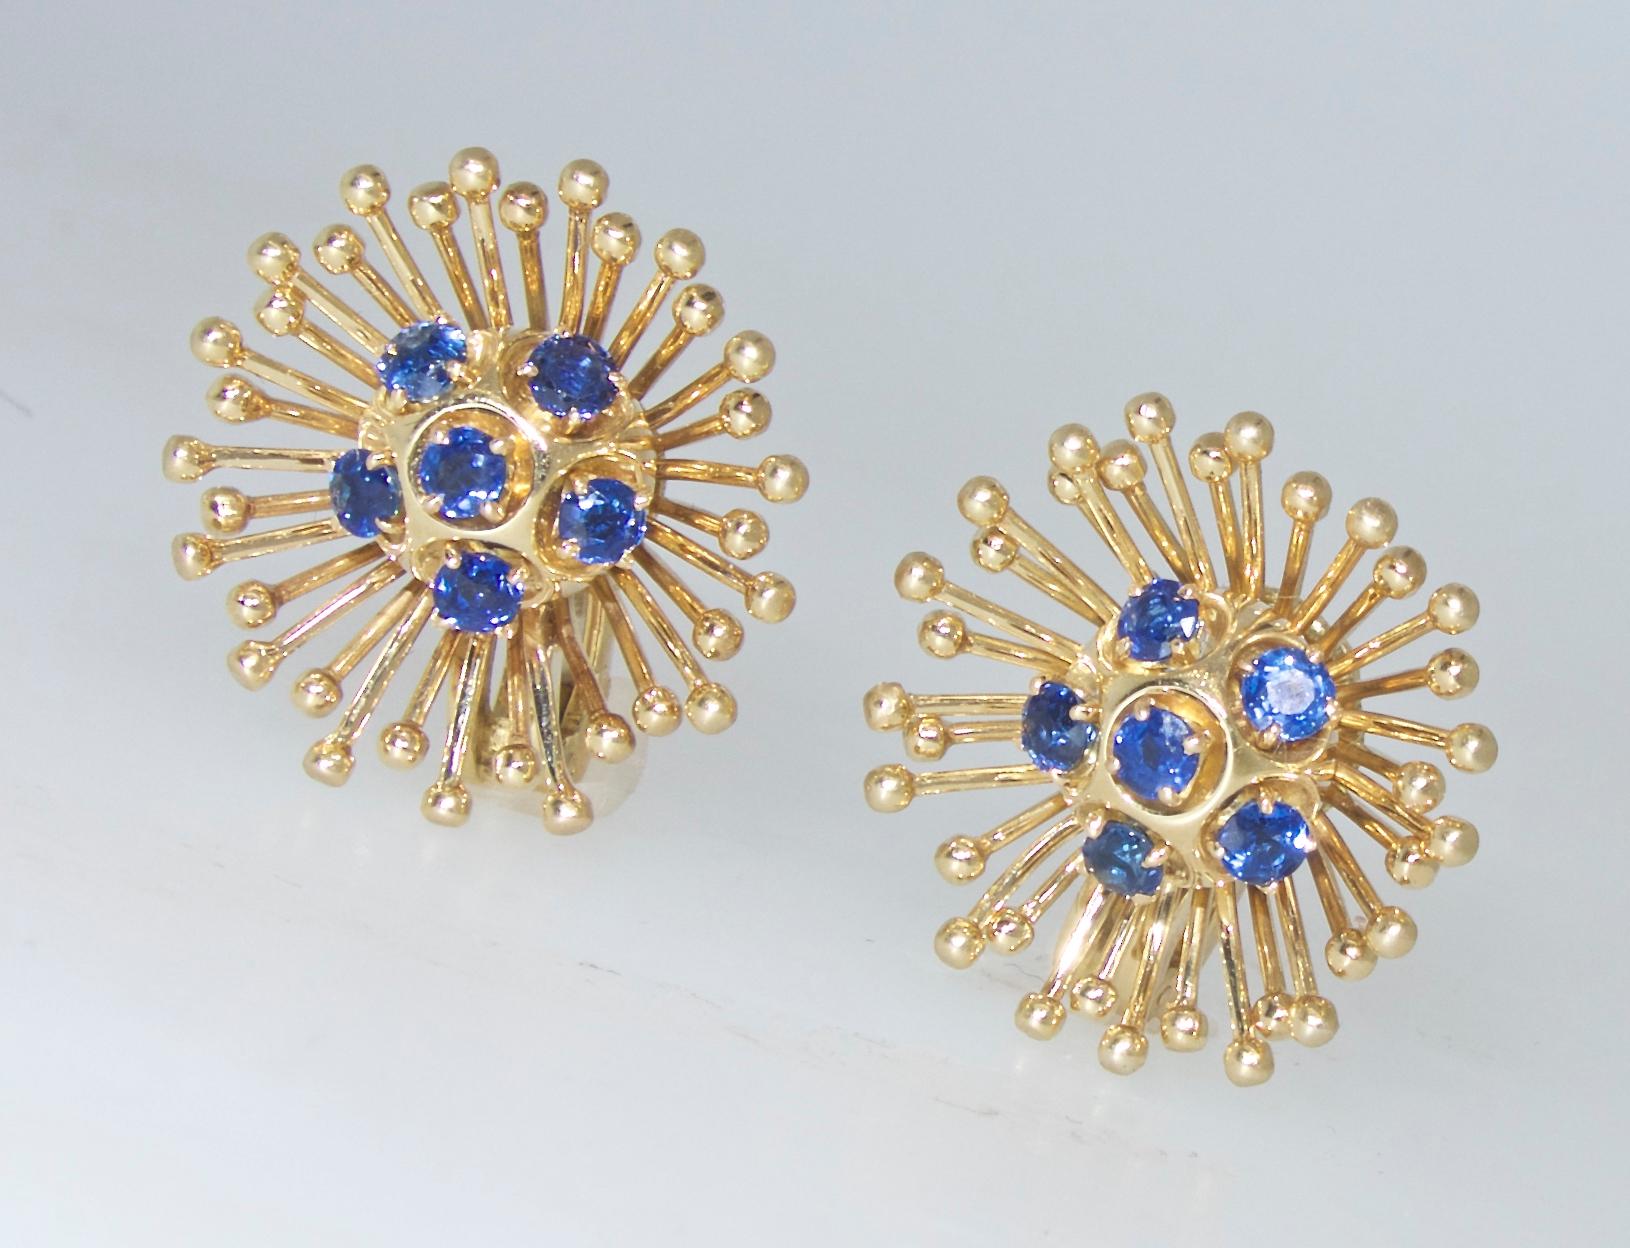 Cartier earrings centered with  12 round bright natural sapphires weighing approximately 1.20 cts.  These  18K yellow gold earrings measure just over .75 inches.  They are in fine condition and are now for a non pierced ear but can be converted by